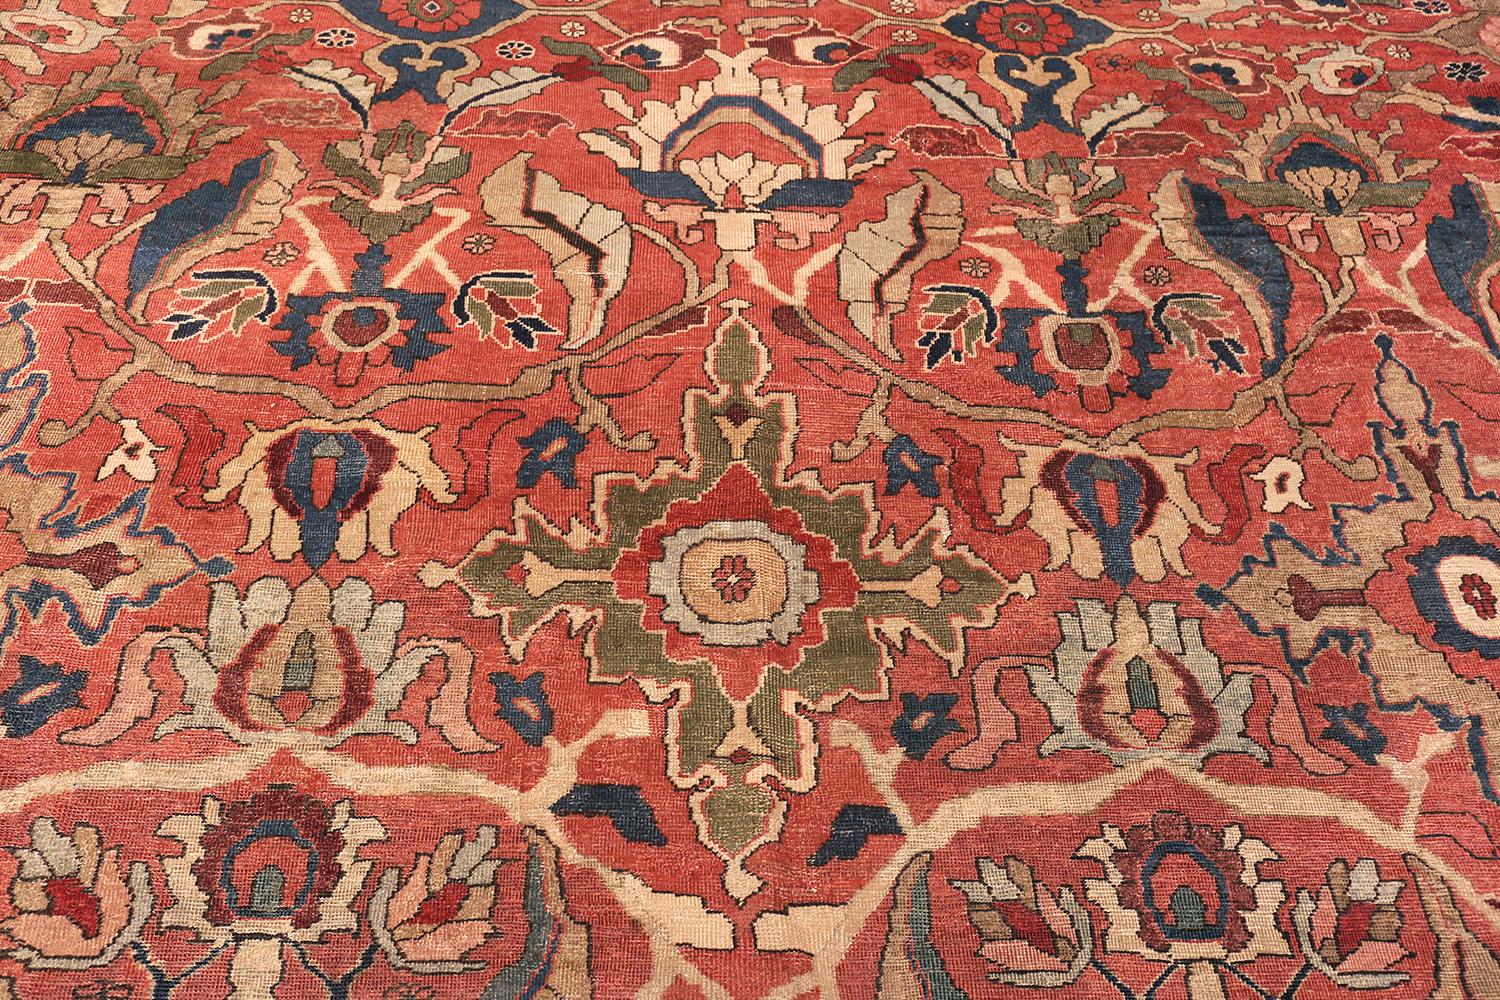 19th Century Oversized Antique Persian Sultanabad Rug. Size: 17 ft. 6 in x 31 ft. 2 in